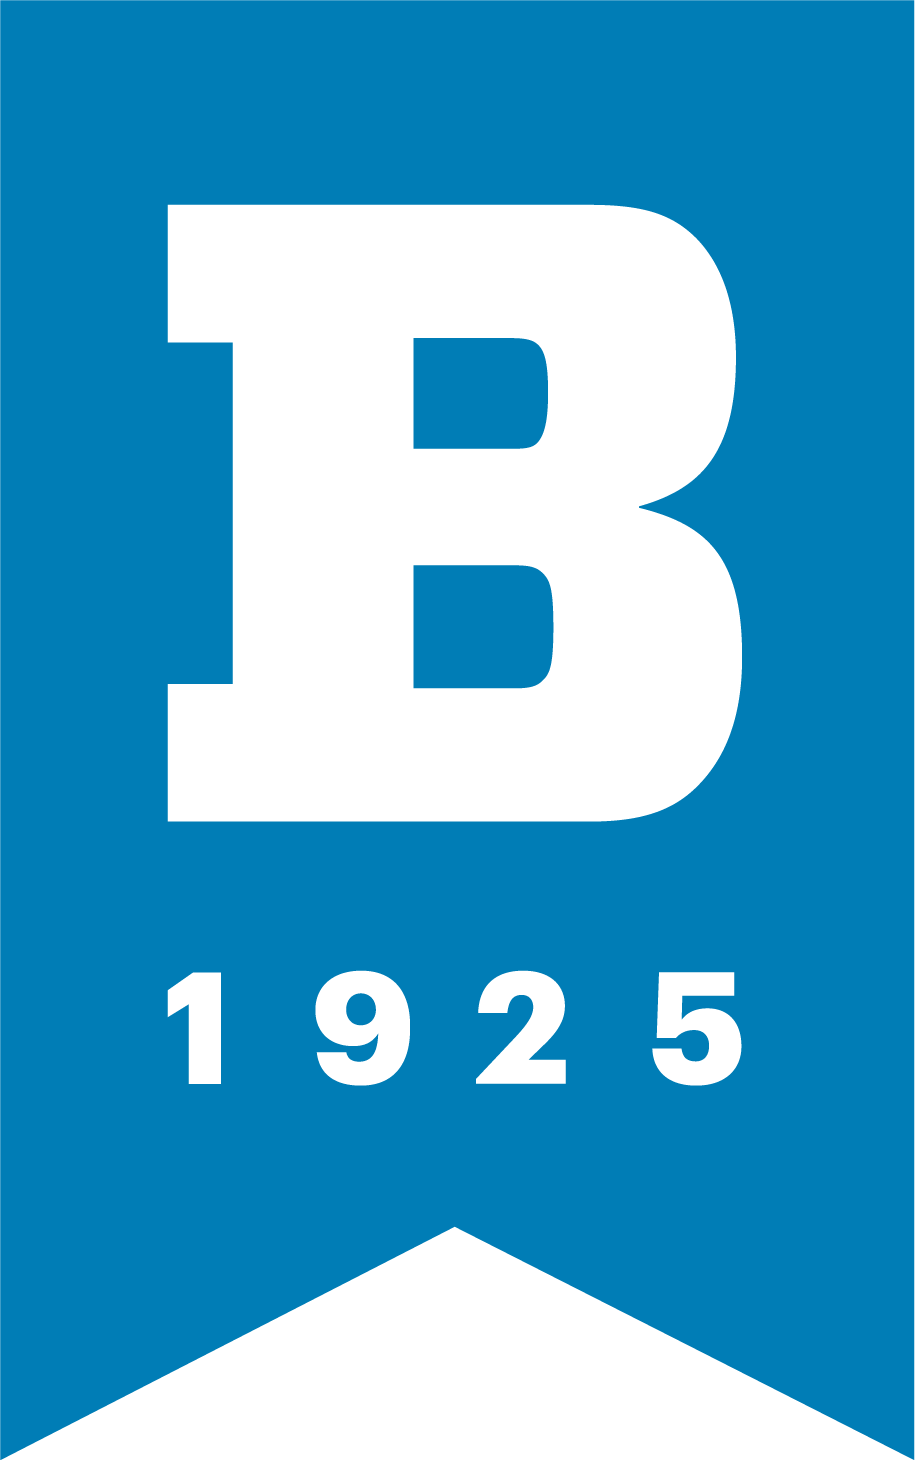 UBalt emblem with the letter "b" and the founding year of 1925